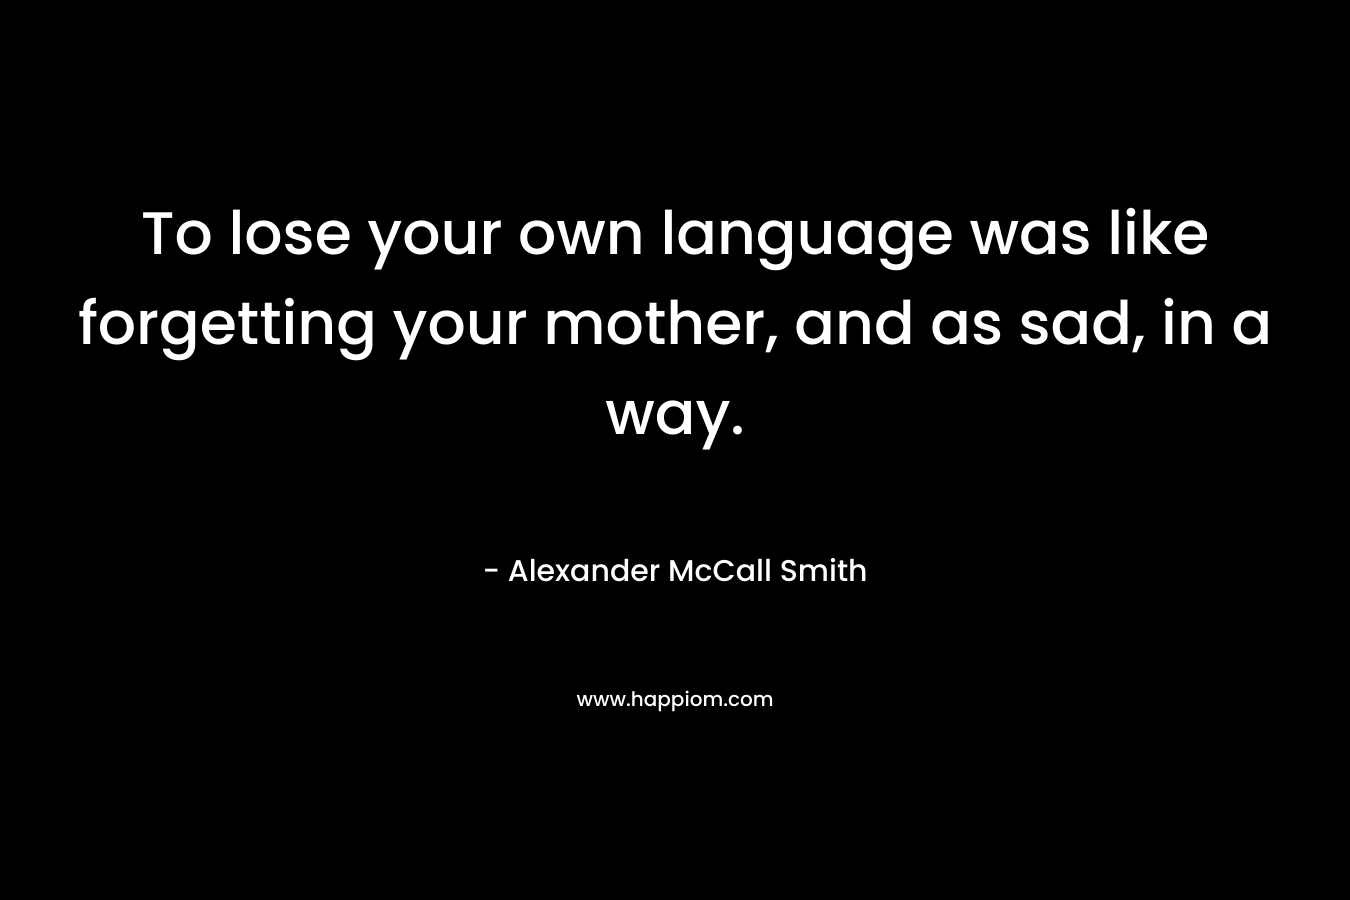 To lose your own language was like forgetting your mother, and as sad, in a way. – Alexander McCall Smith